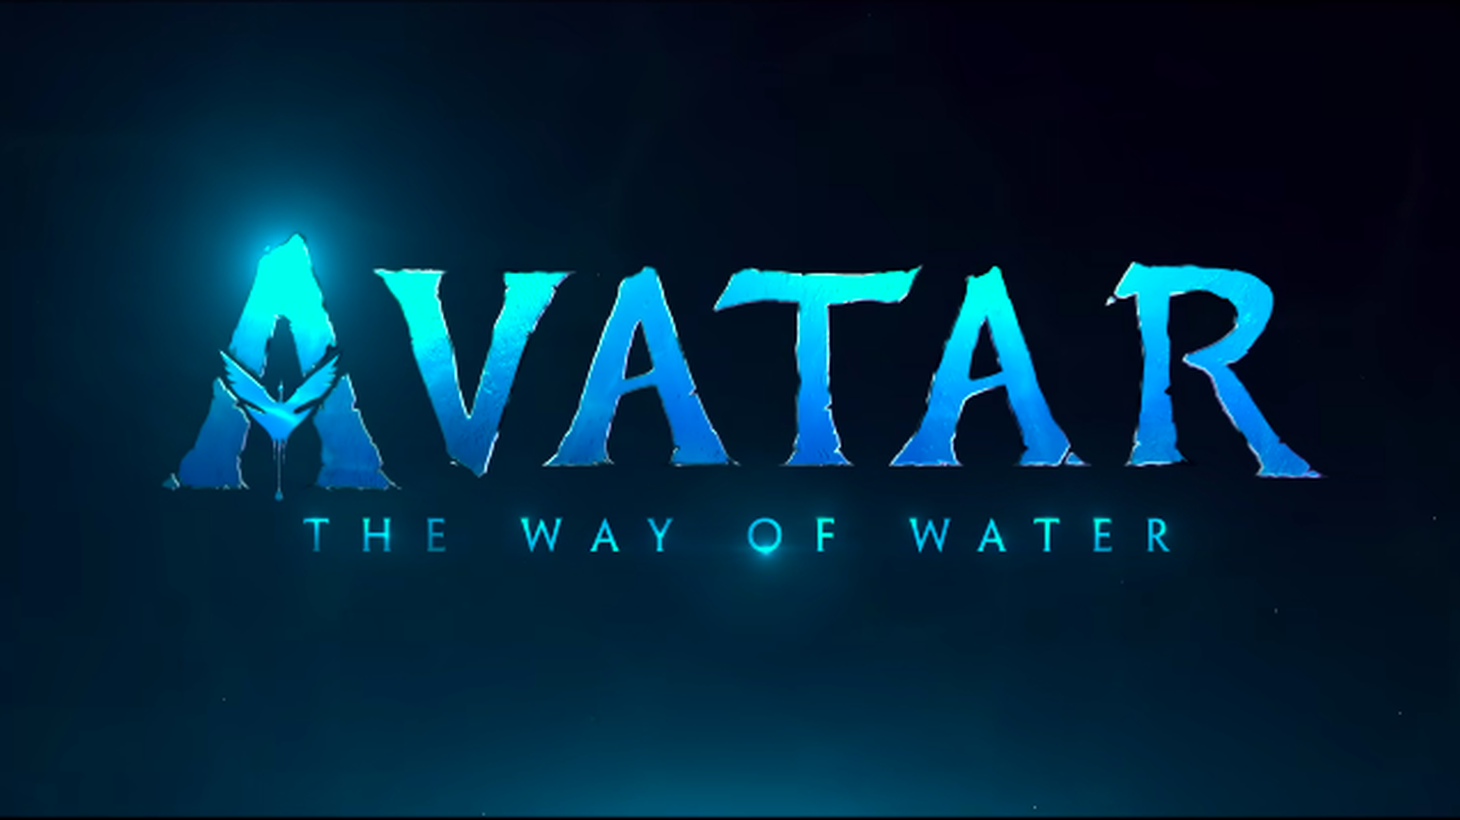 “Avatar: Way of Water” is the epic, sci-fi sequel from director James Cameron.